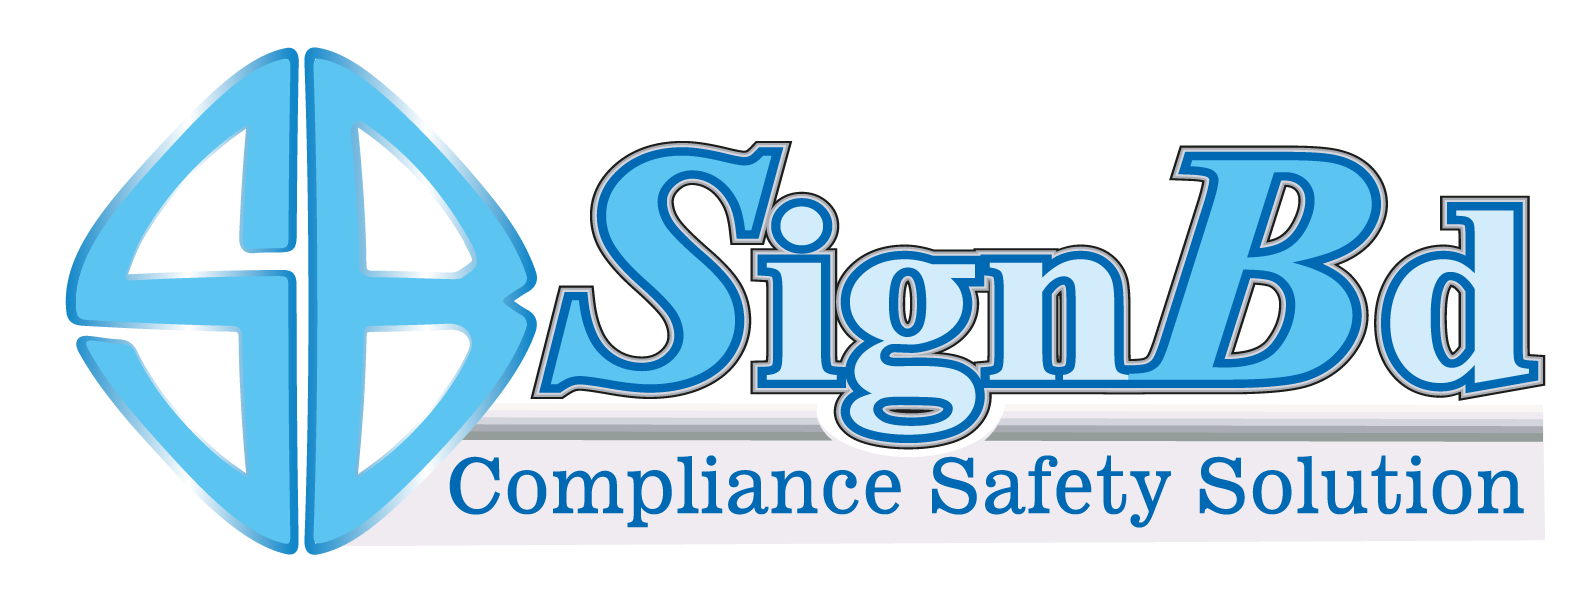 signbd- Compliance Related Safety Sign Company